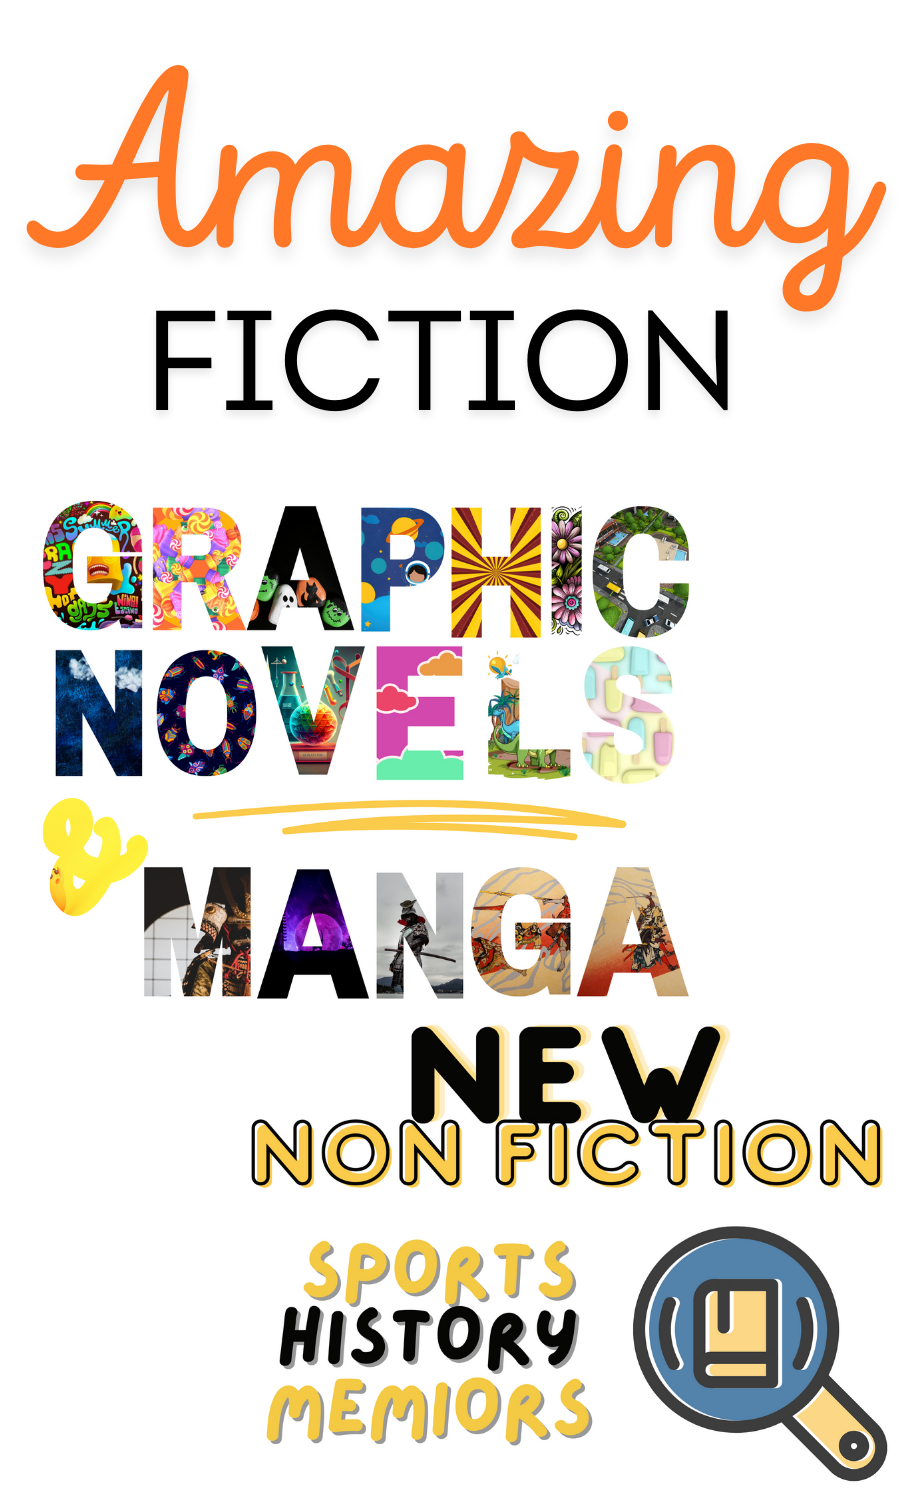 Artsy words for Fiction, Graphic Novels, Manga, Non-Fiction